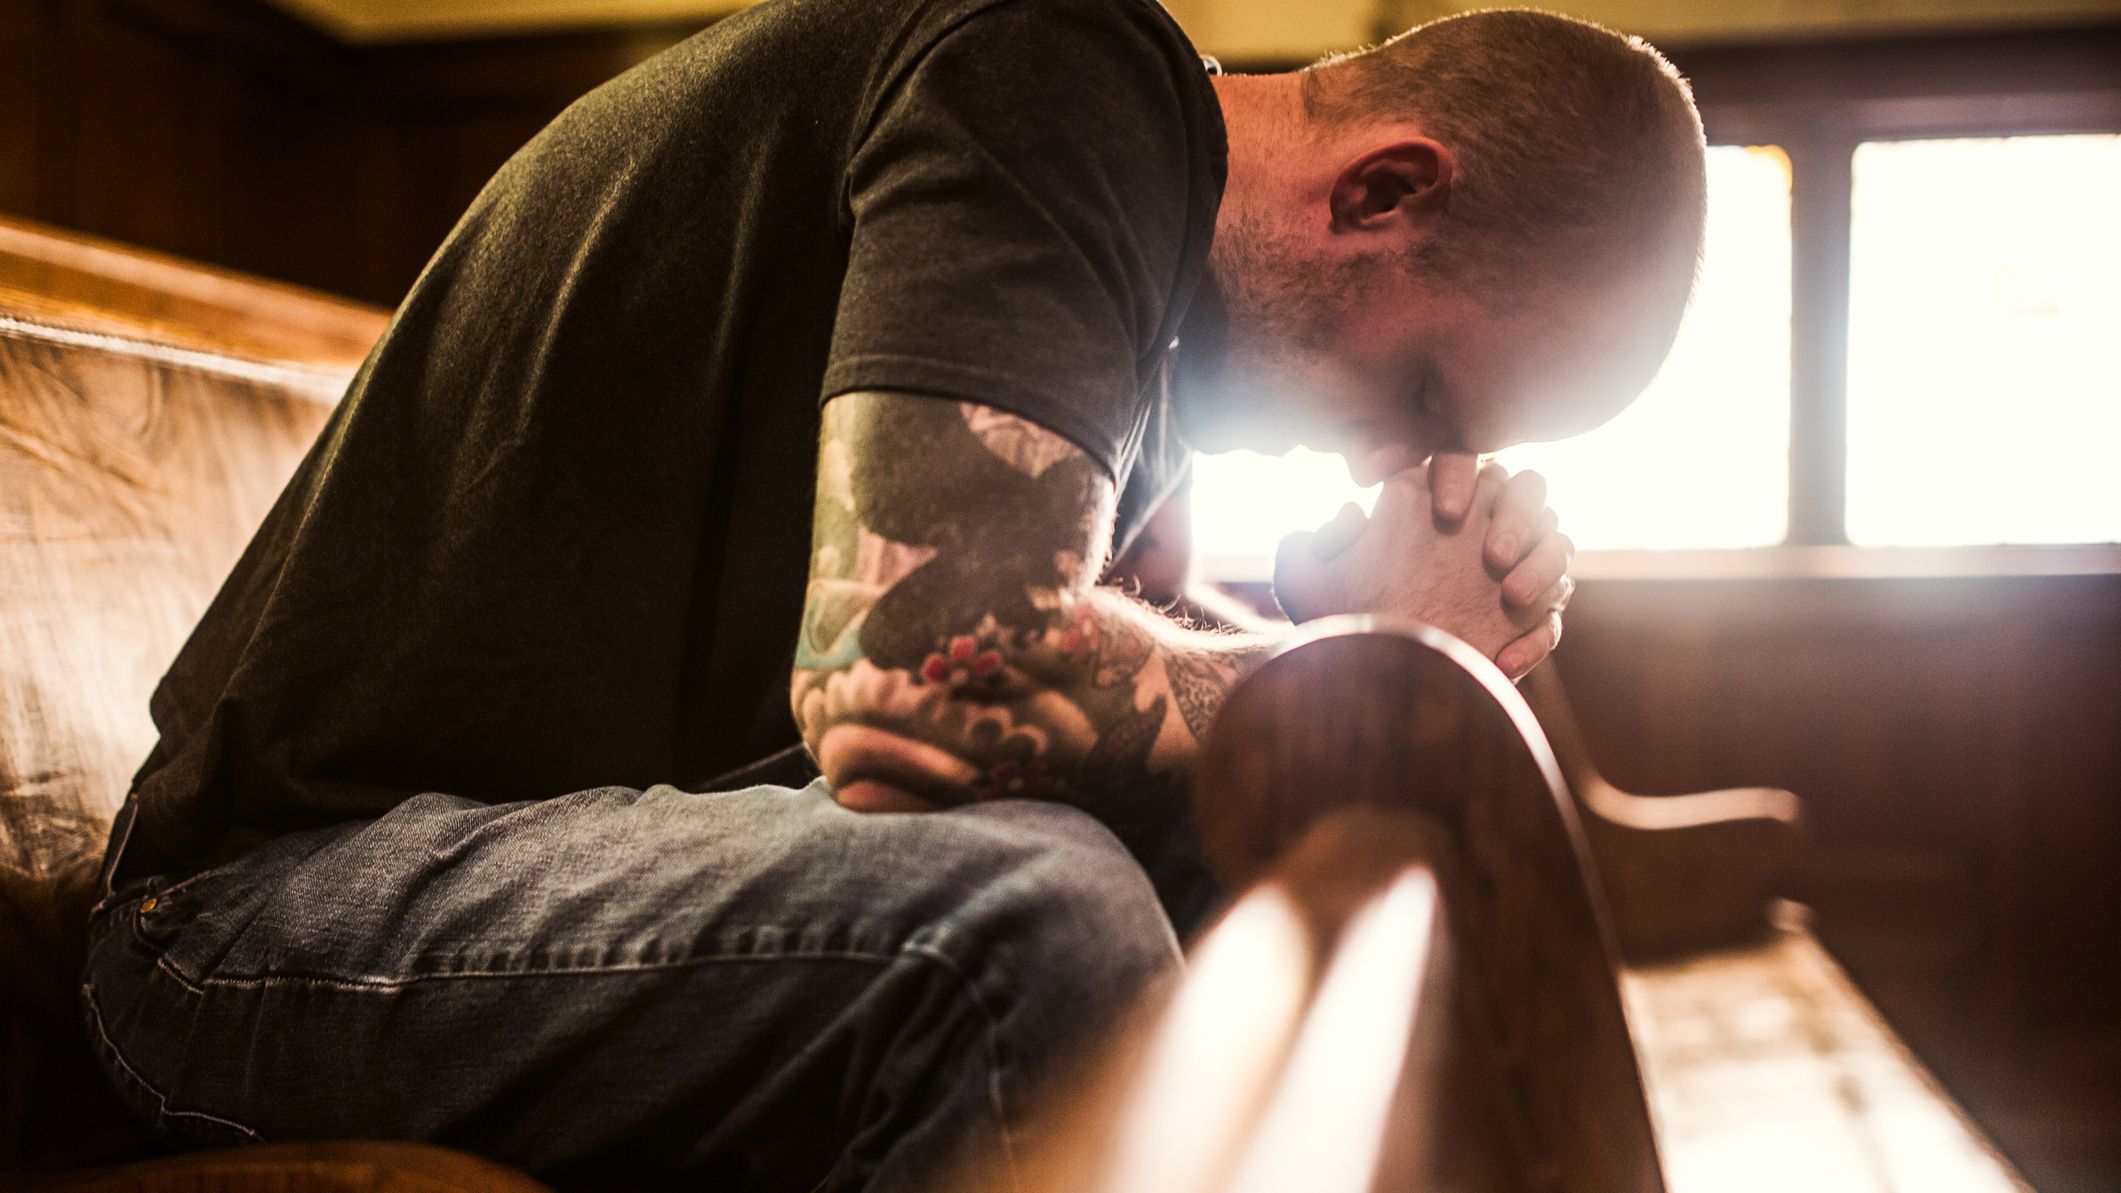 a man in a short-sleeved shirt with tattoos is sitting on a pew, bent over in prayer